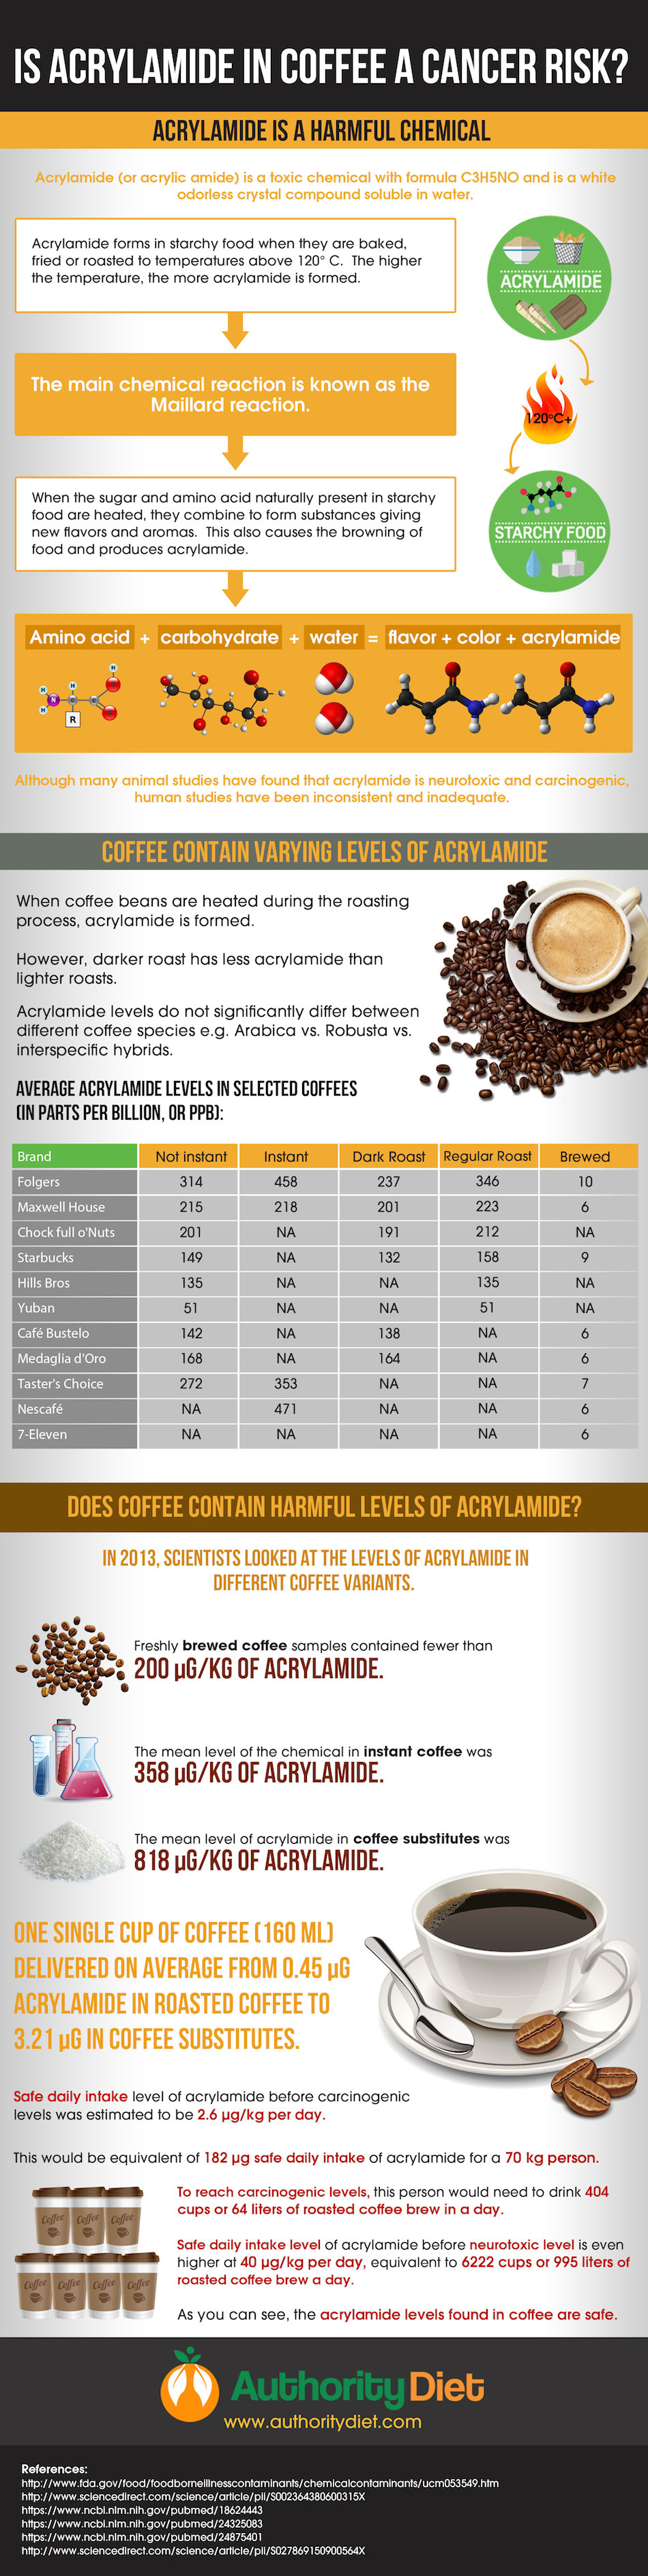 Is Acrylamide in Coffee a Concern?